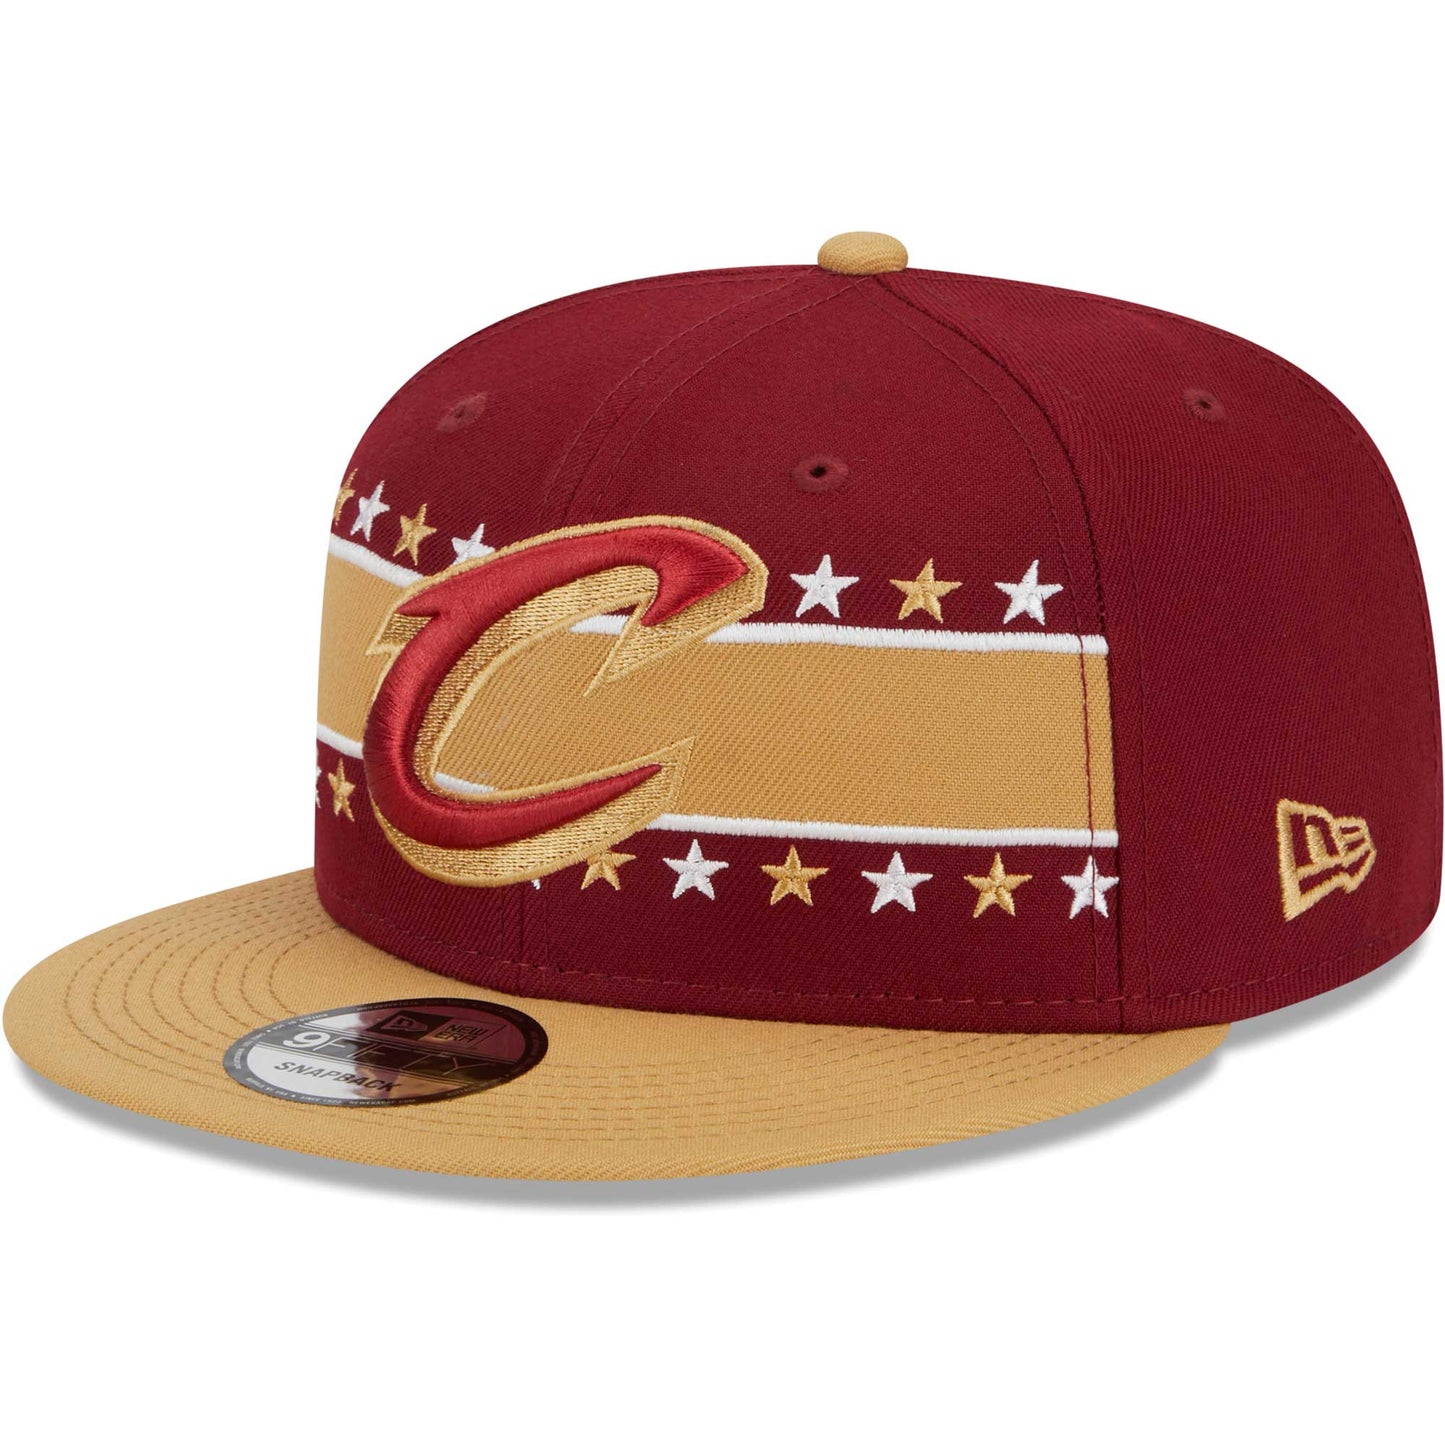 Cleveland Cavaliers New Era Banded Stars 9FIFTY Snapback Hat - Wine